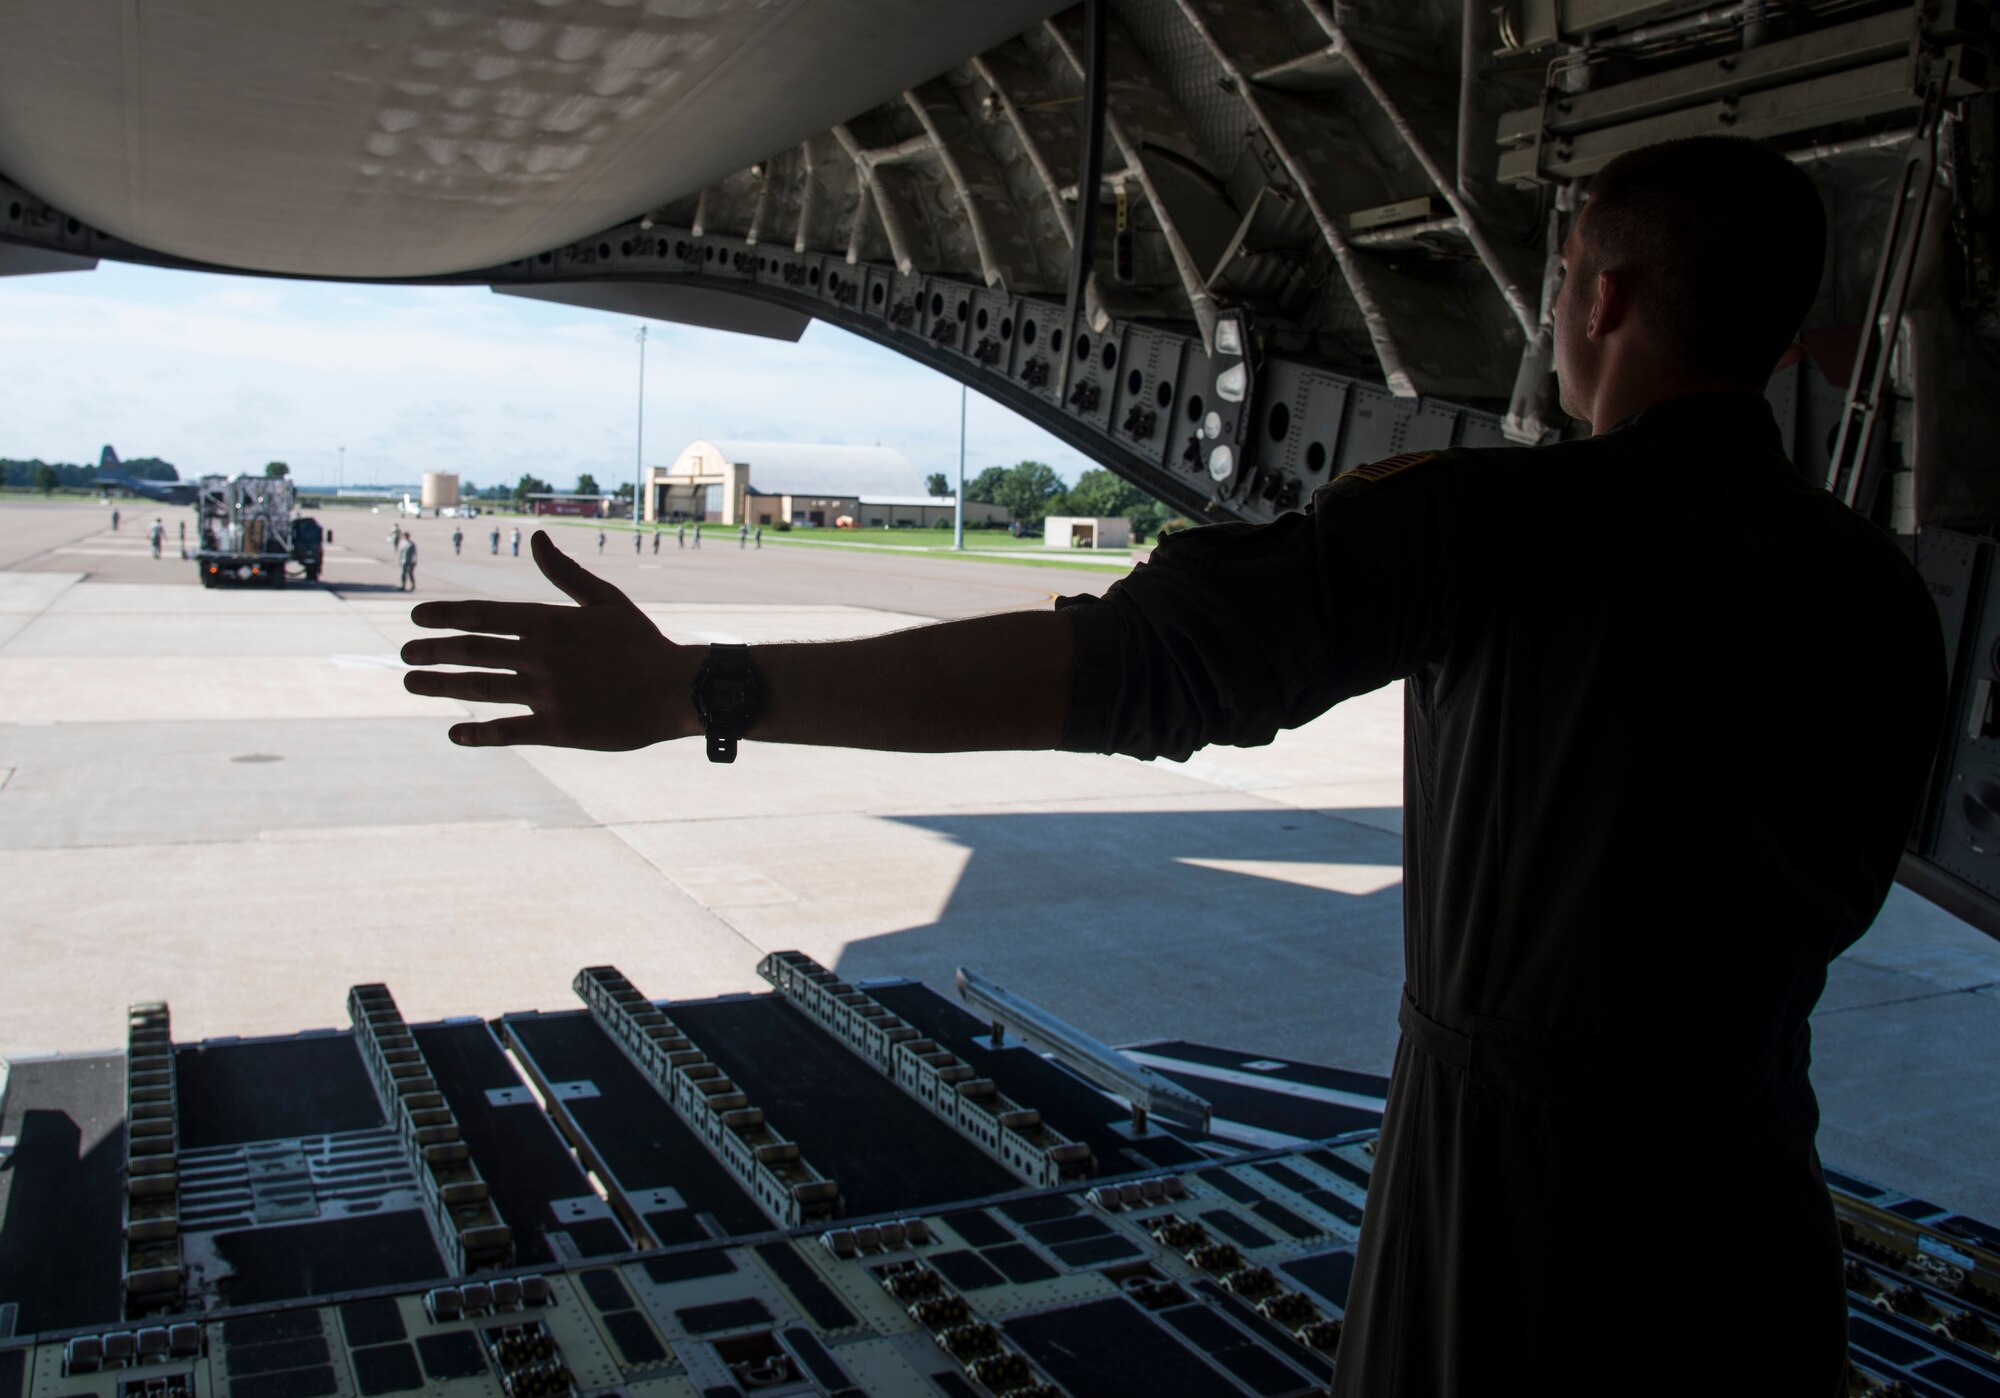 Airman Jeff Mcgee, 3rd Airlift Squadron loadmaster, ushers in a Transportation Isolation System onto a C-17 Globemaster from Dover Air Force Base at Scott Air Force Base on Aug. 18, 2016. The 375th Aeromedical Evacuation Squadron used the TIS during training as a containment tool to transport sick and contagious patients to more definitive treament without compromising the safety of the crew. (U.S.Air Force Photo by Airman Daniel Garcia)